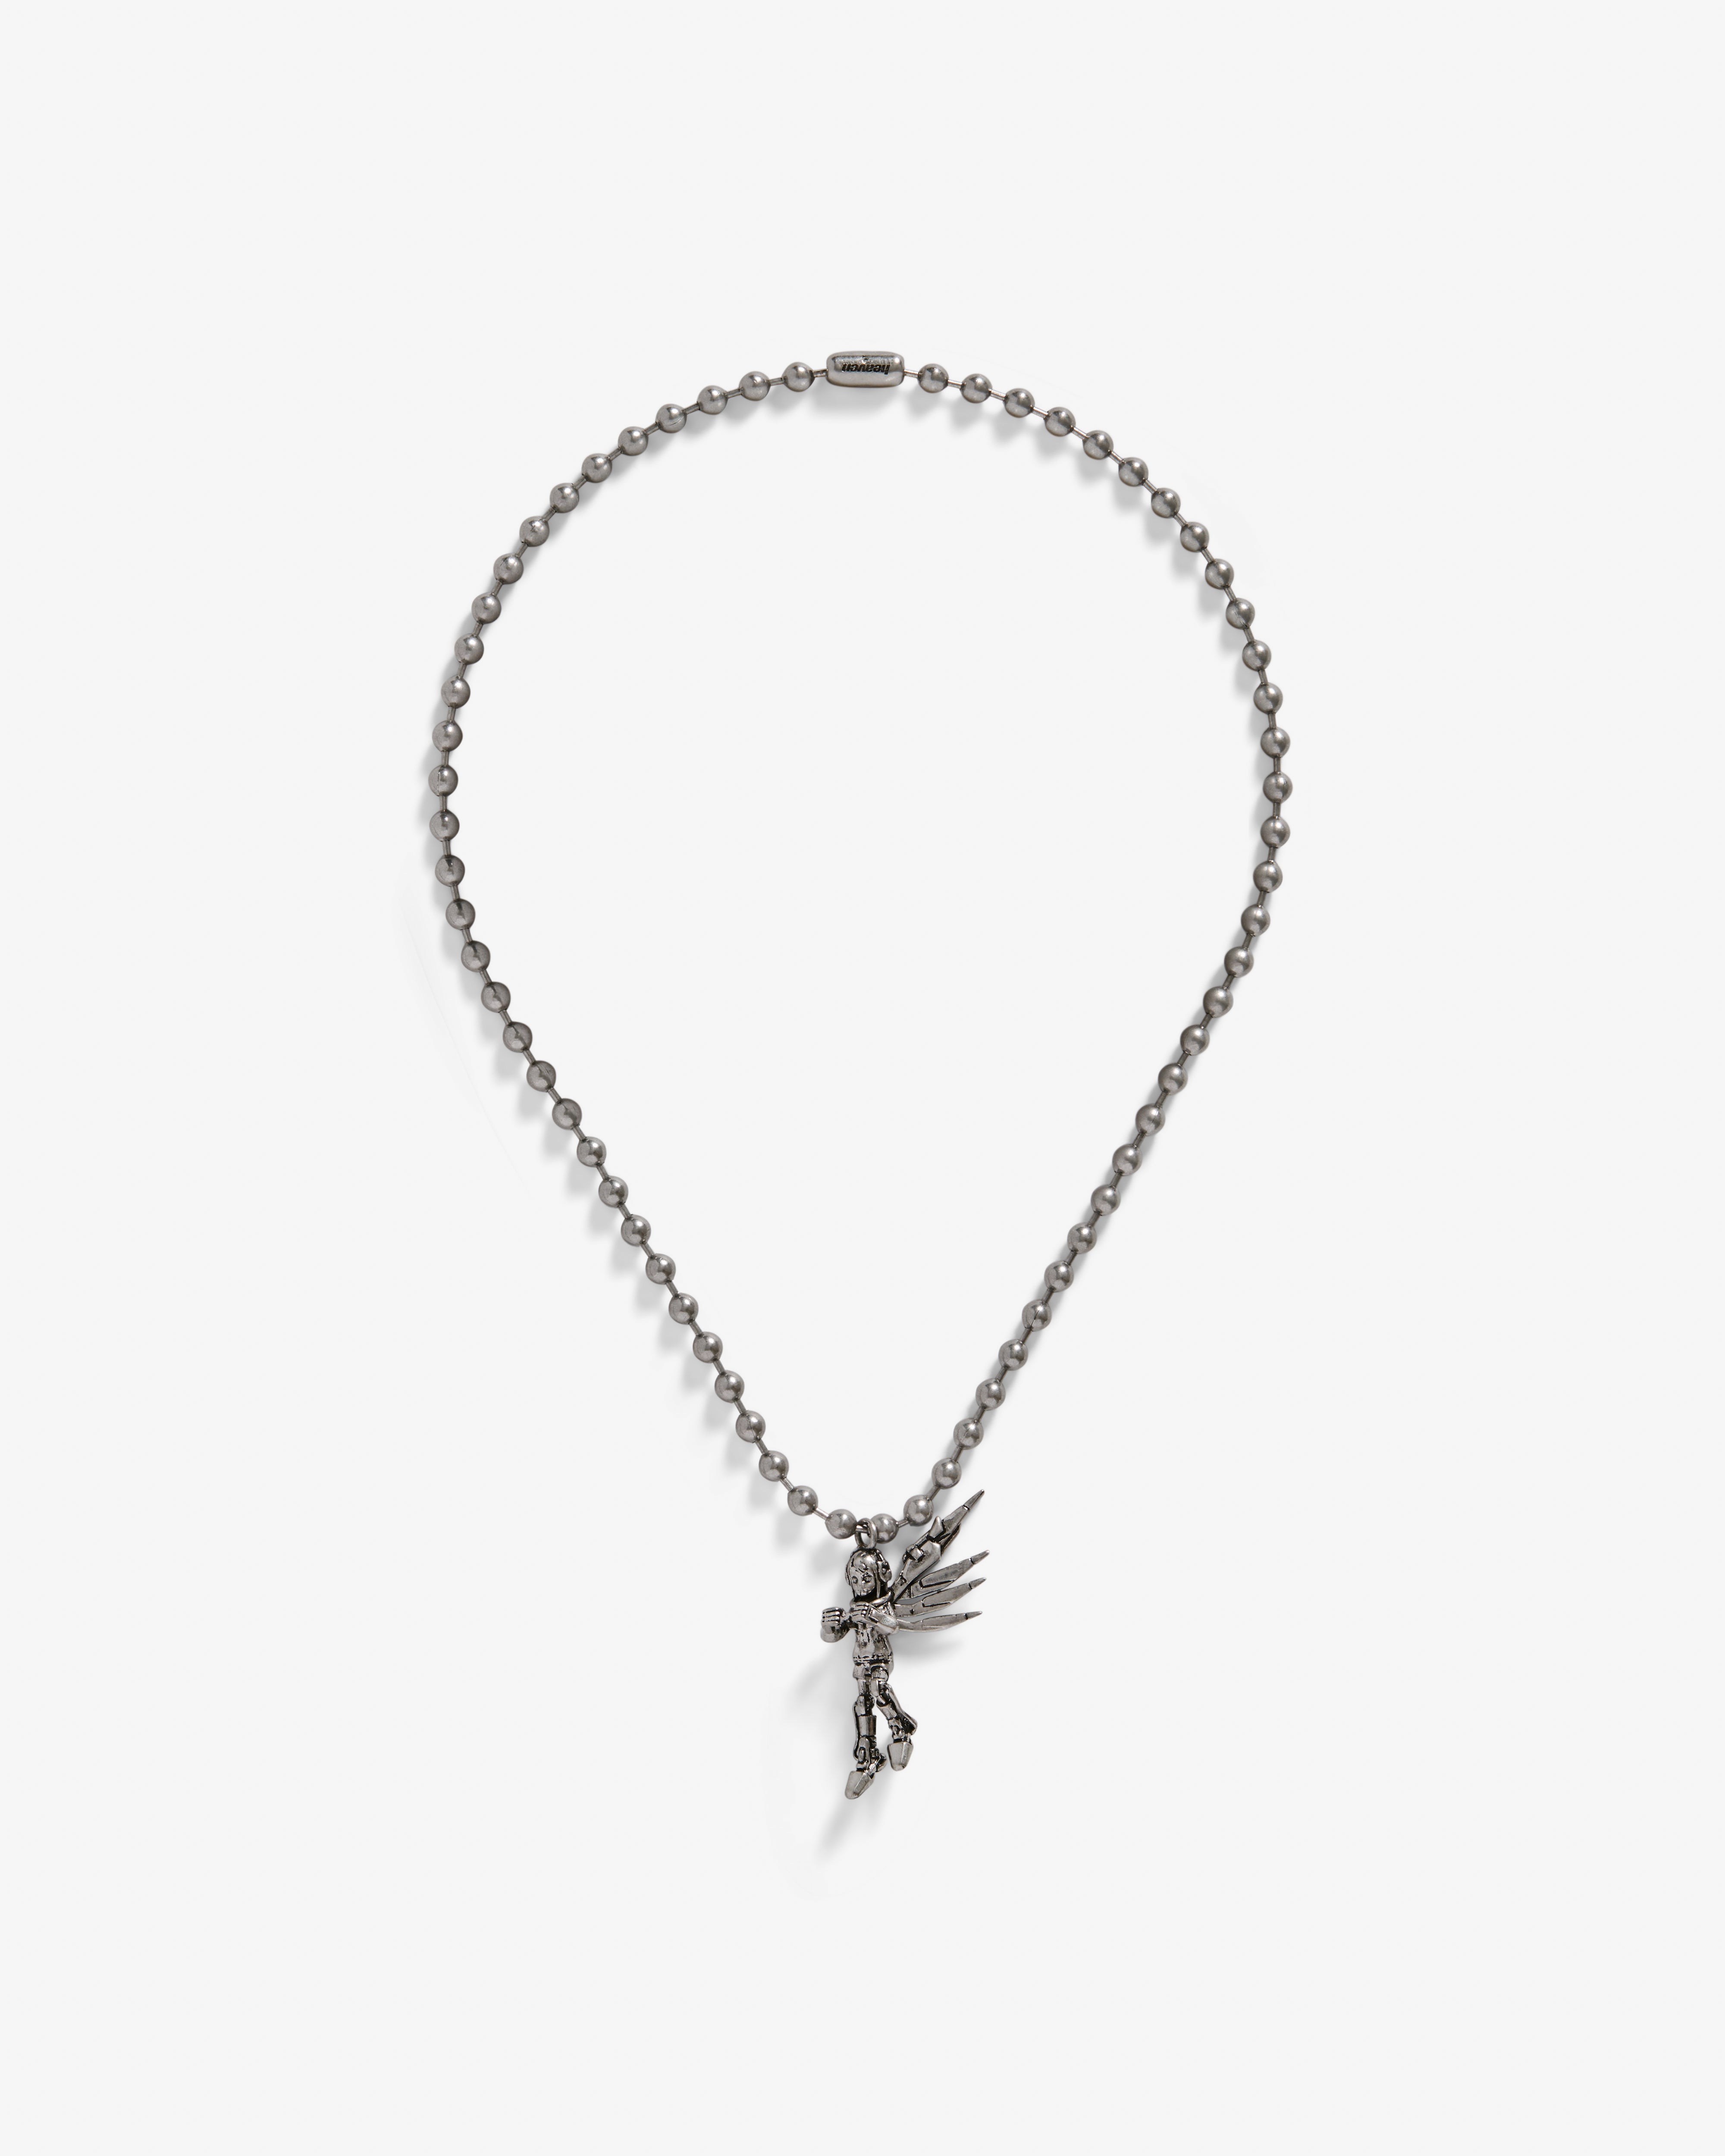 heaven by marc jacobs bff necklace | Bff necklaces, Friendship necklaces,  Bff